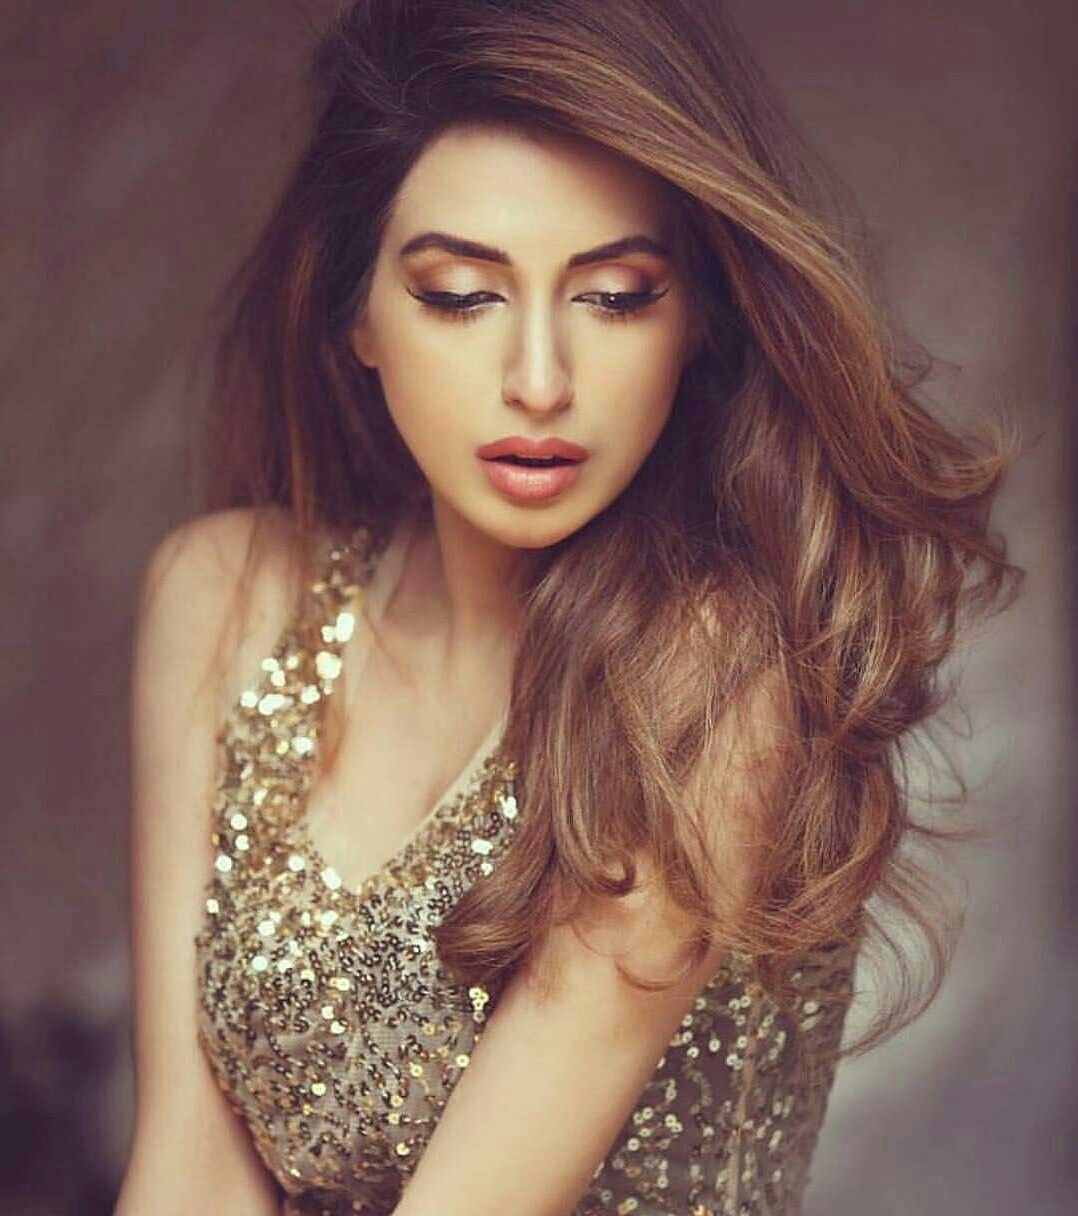 Iman Ali Awesome Look